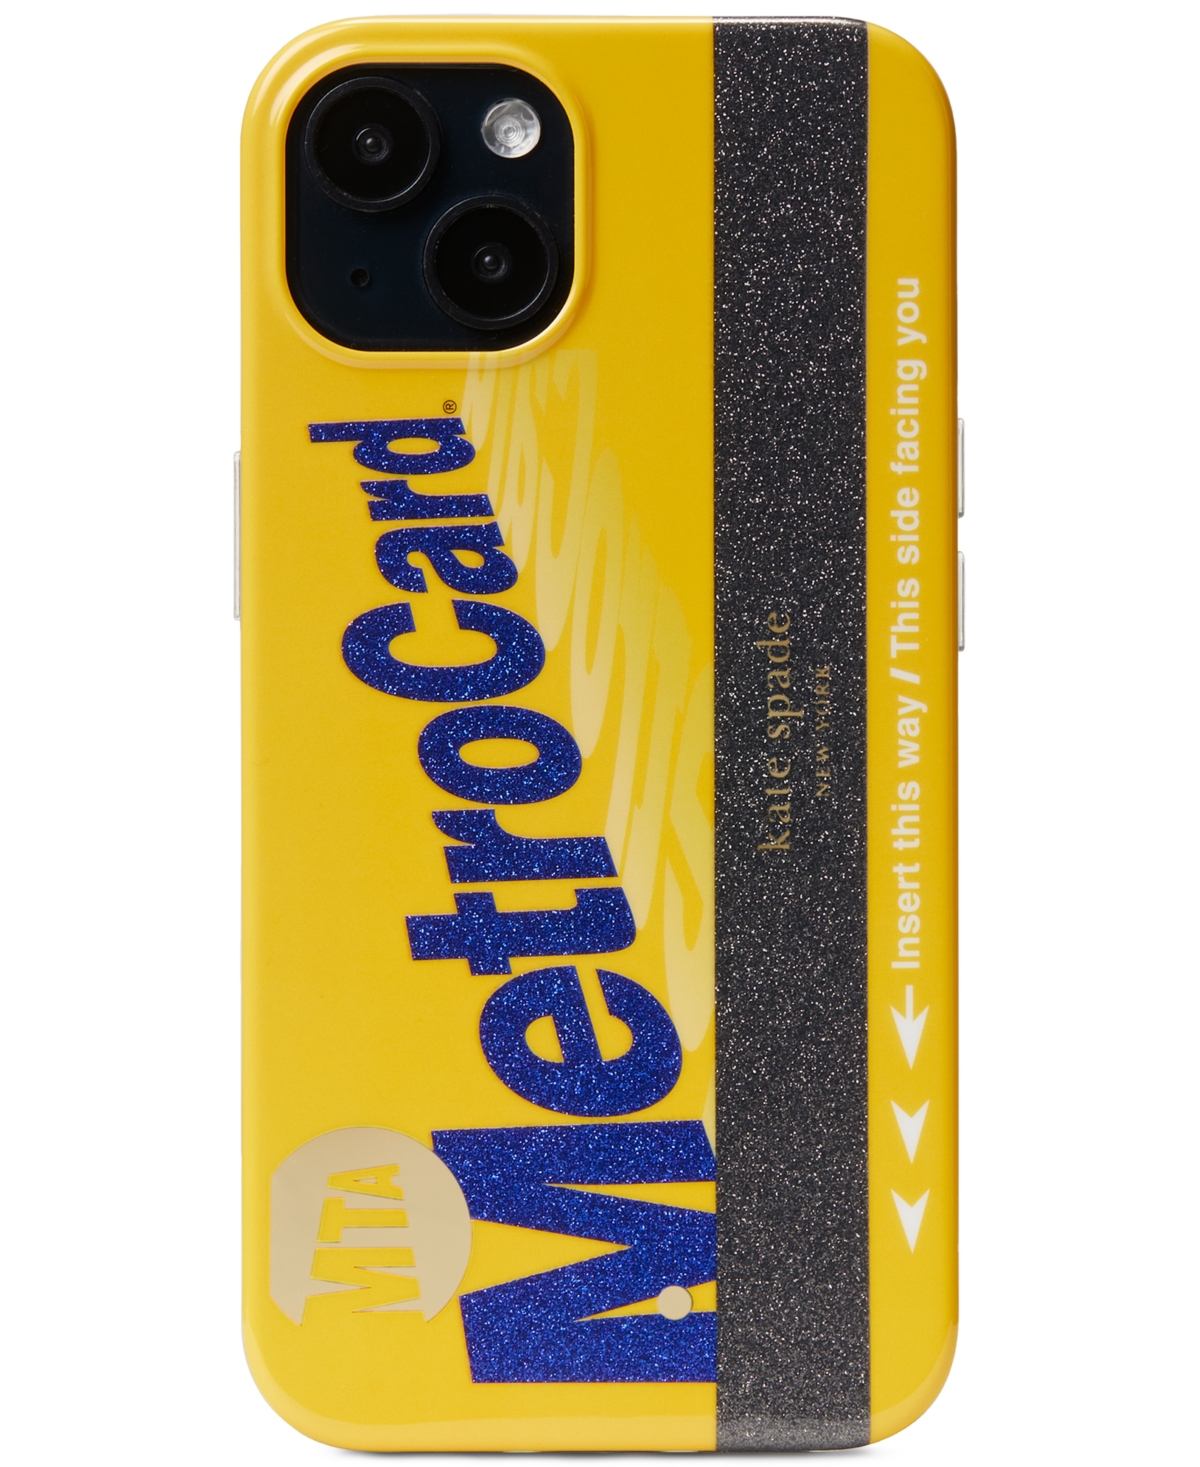 On a Roll Metrocard Printed Phone Case 13 - High Noon Multi